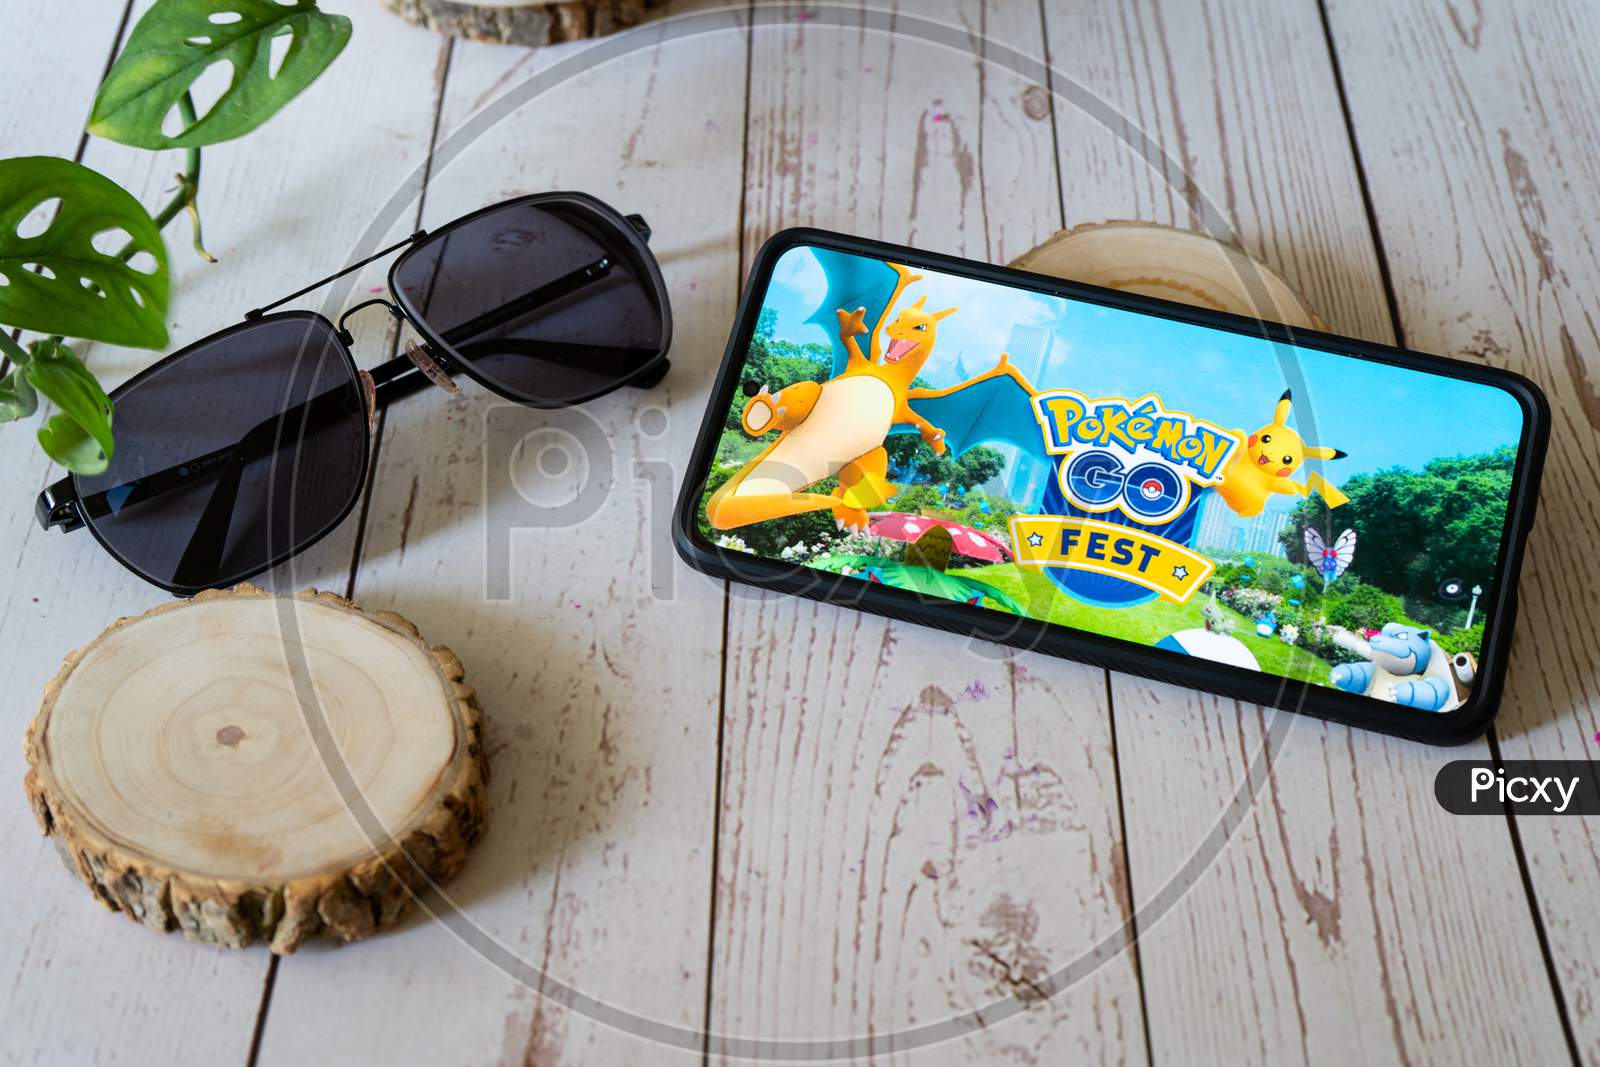 Famous Augmented Reality Virtual Game Pokemon Go Fest Playing On A Mobile Phone On A Wooden Table Outdoors With Plants Goggles Showing People Enjoying This Multiplayer Game